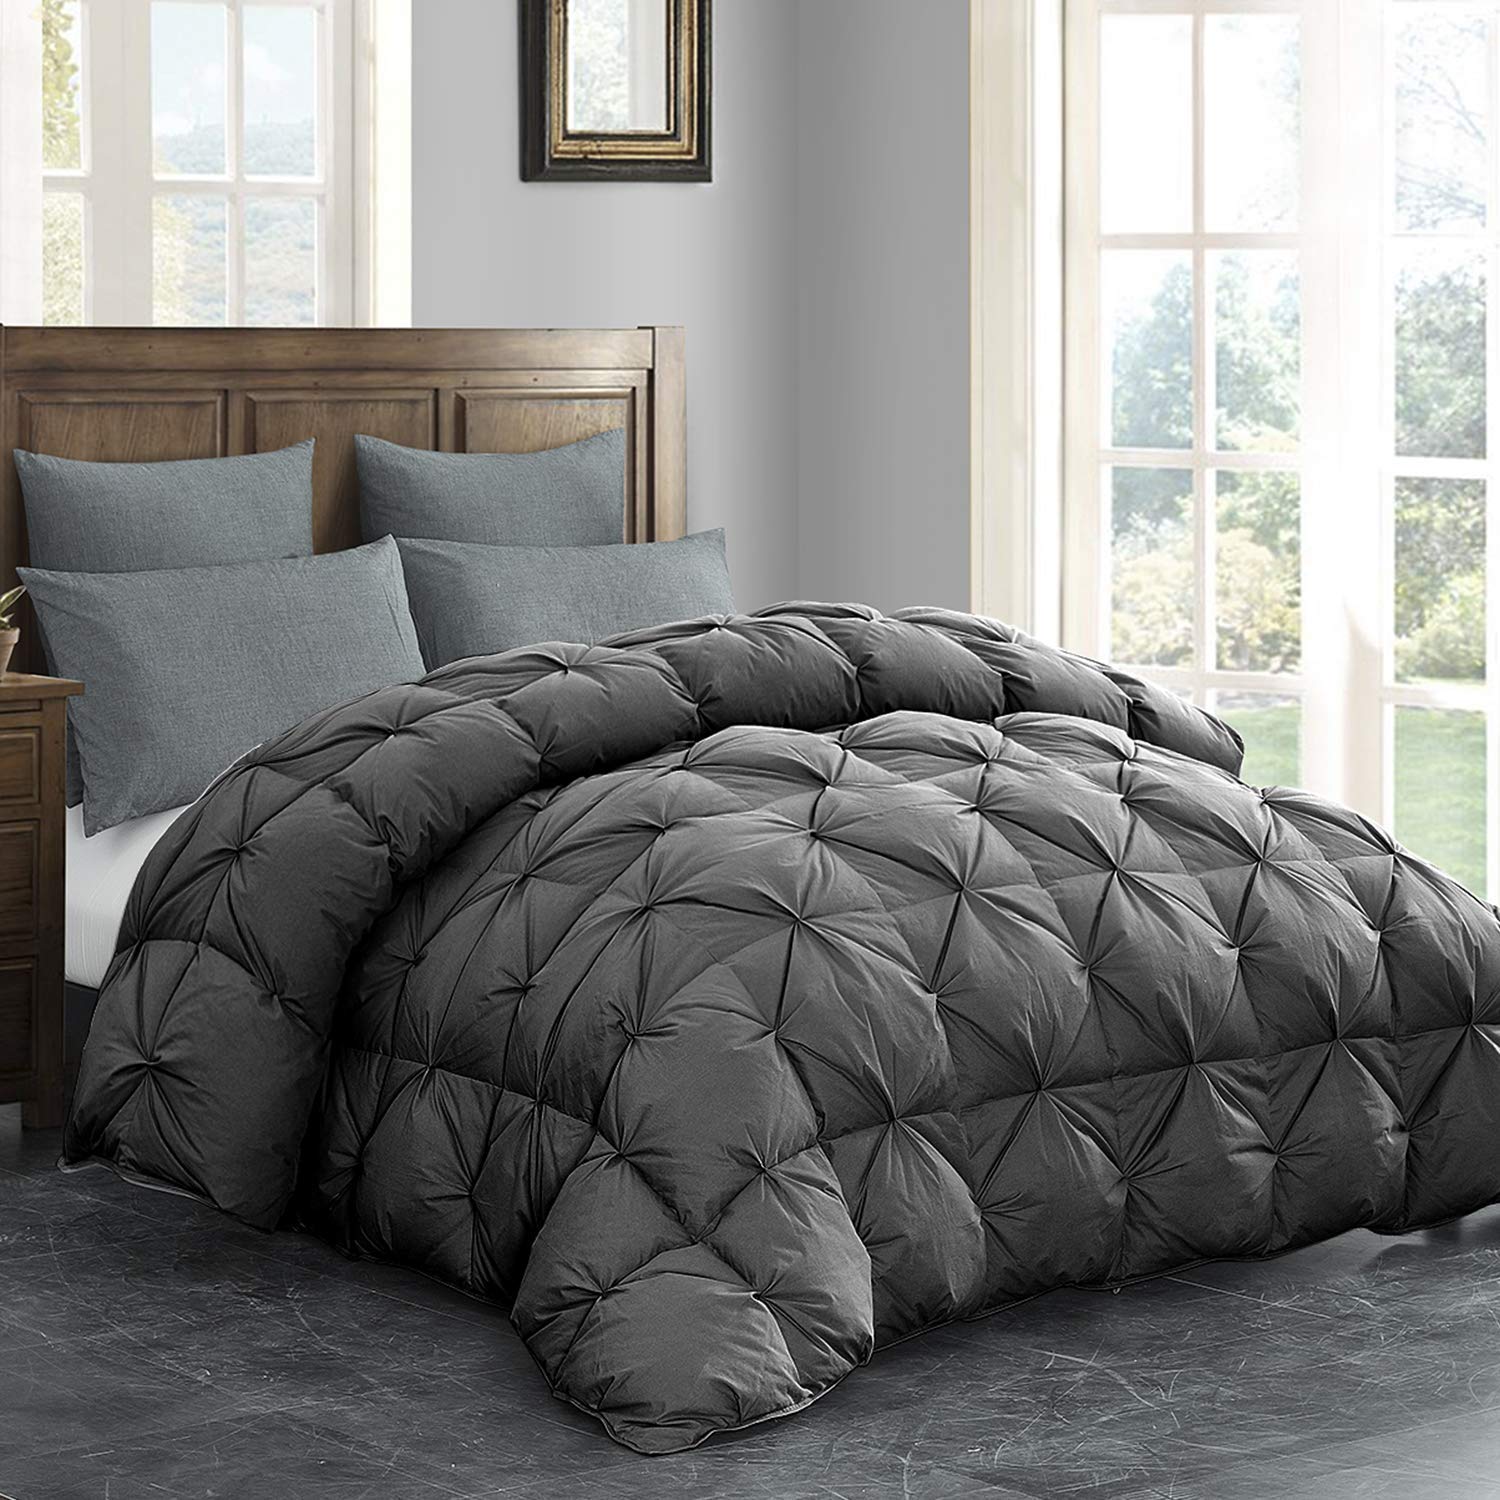 Great Choice Products California King Feather And Down Comforter, 108 X 98 Inches Grey Pinch Pleat Cal King Size Duvet Insert With 100% Cotton